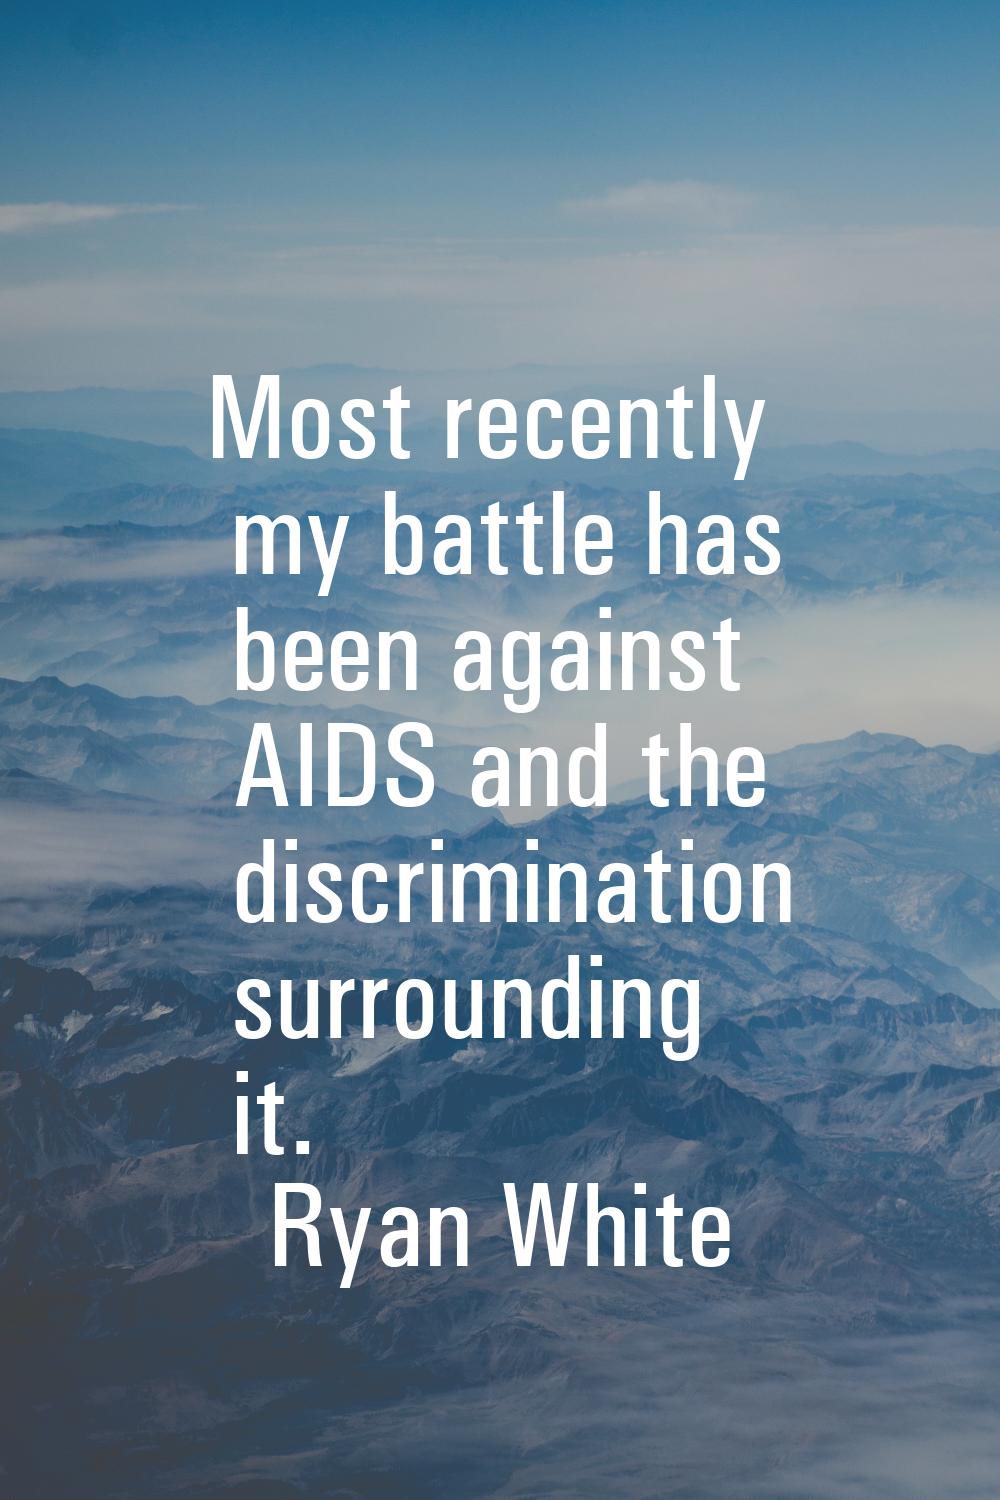 Most recently my battle has been against AIDS and the discrimination surrounding it.